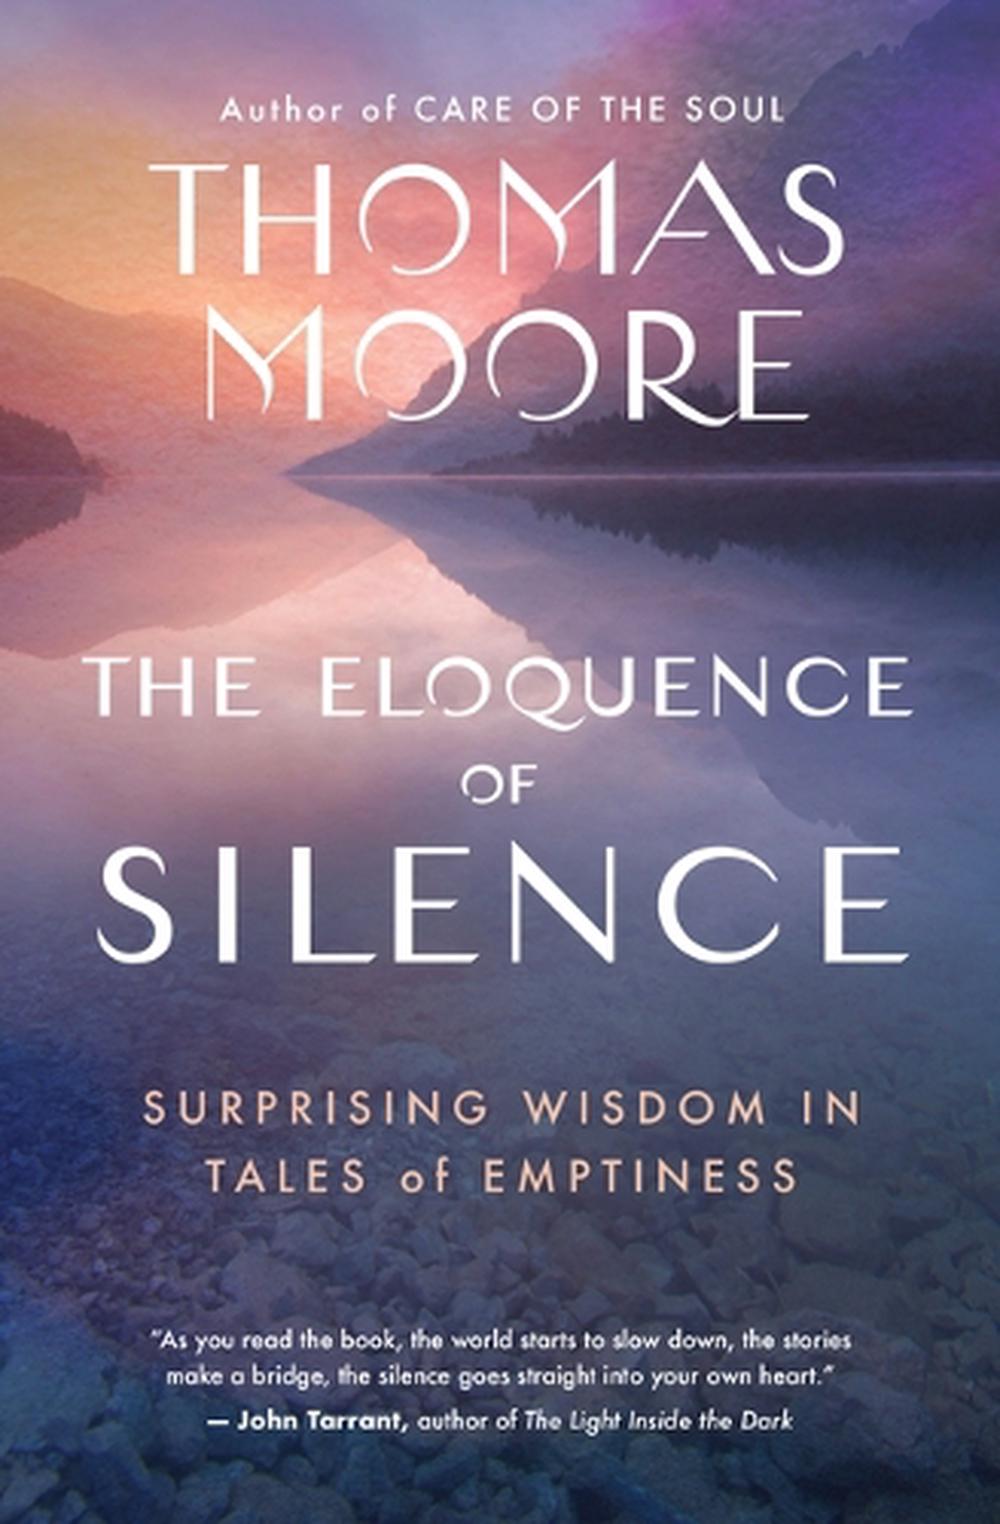 of　at　Thomas　The　Paperback,　Silence　Eloquence　9781608688661　The　Nile　by　Buy　Moore,　online